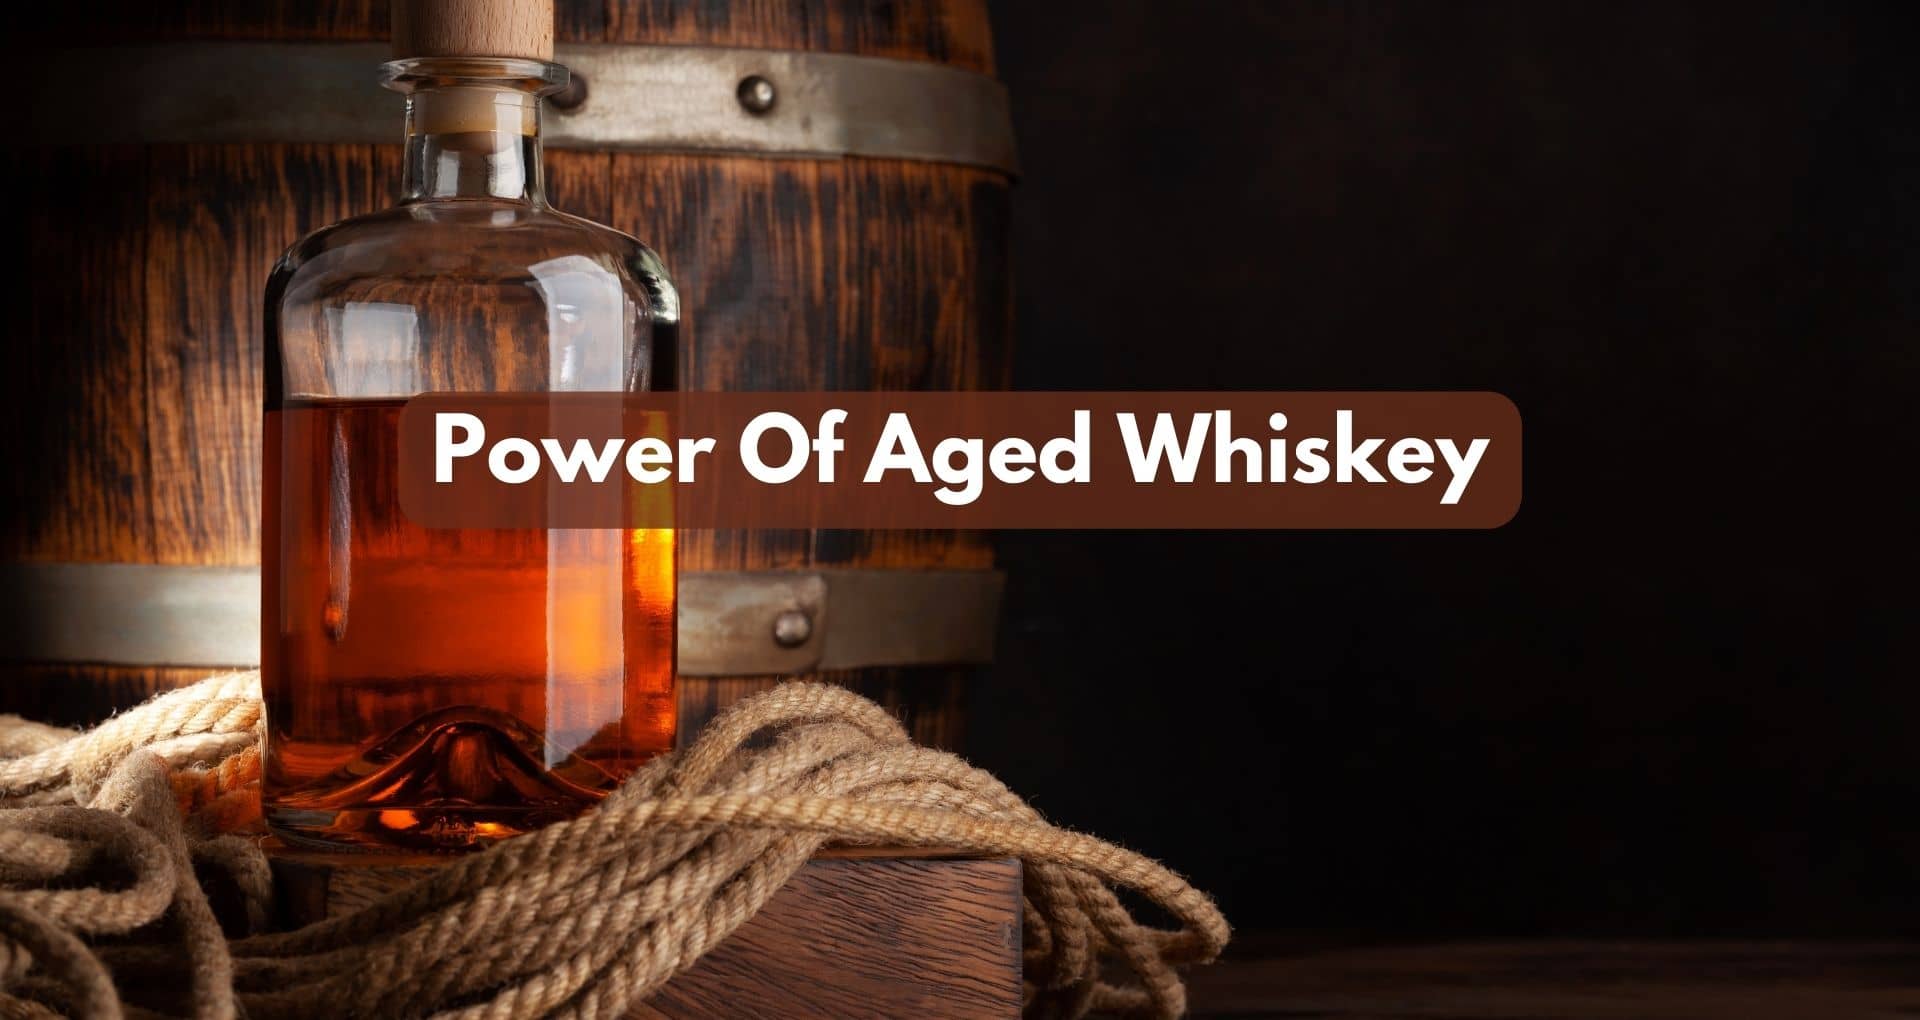 Age Matters: The Power Of Aged Whiskey